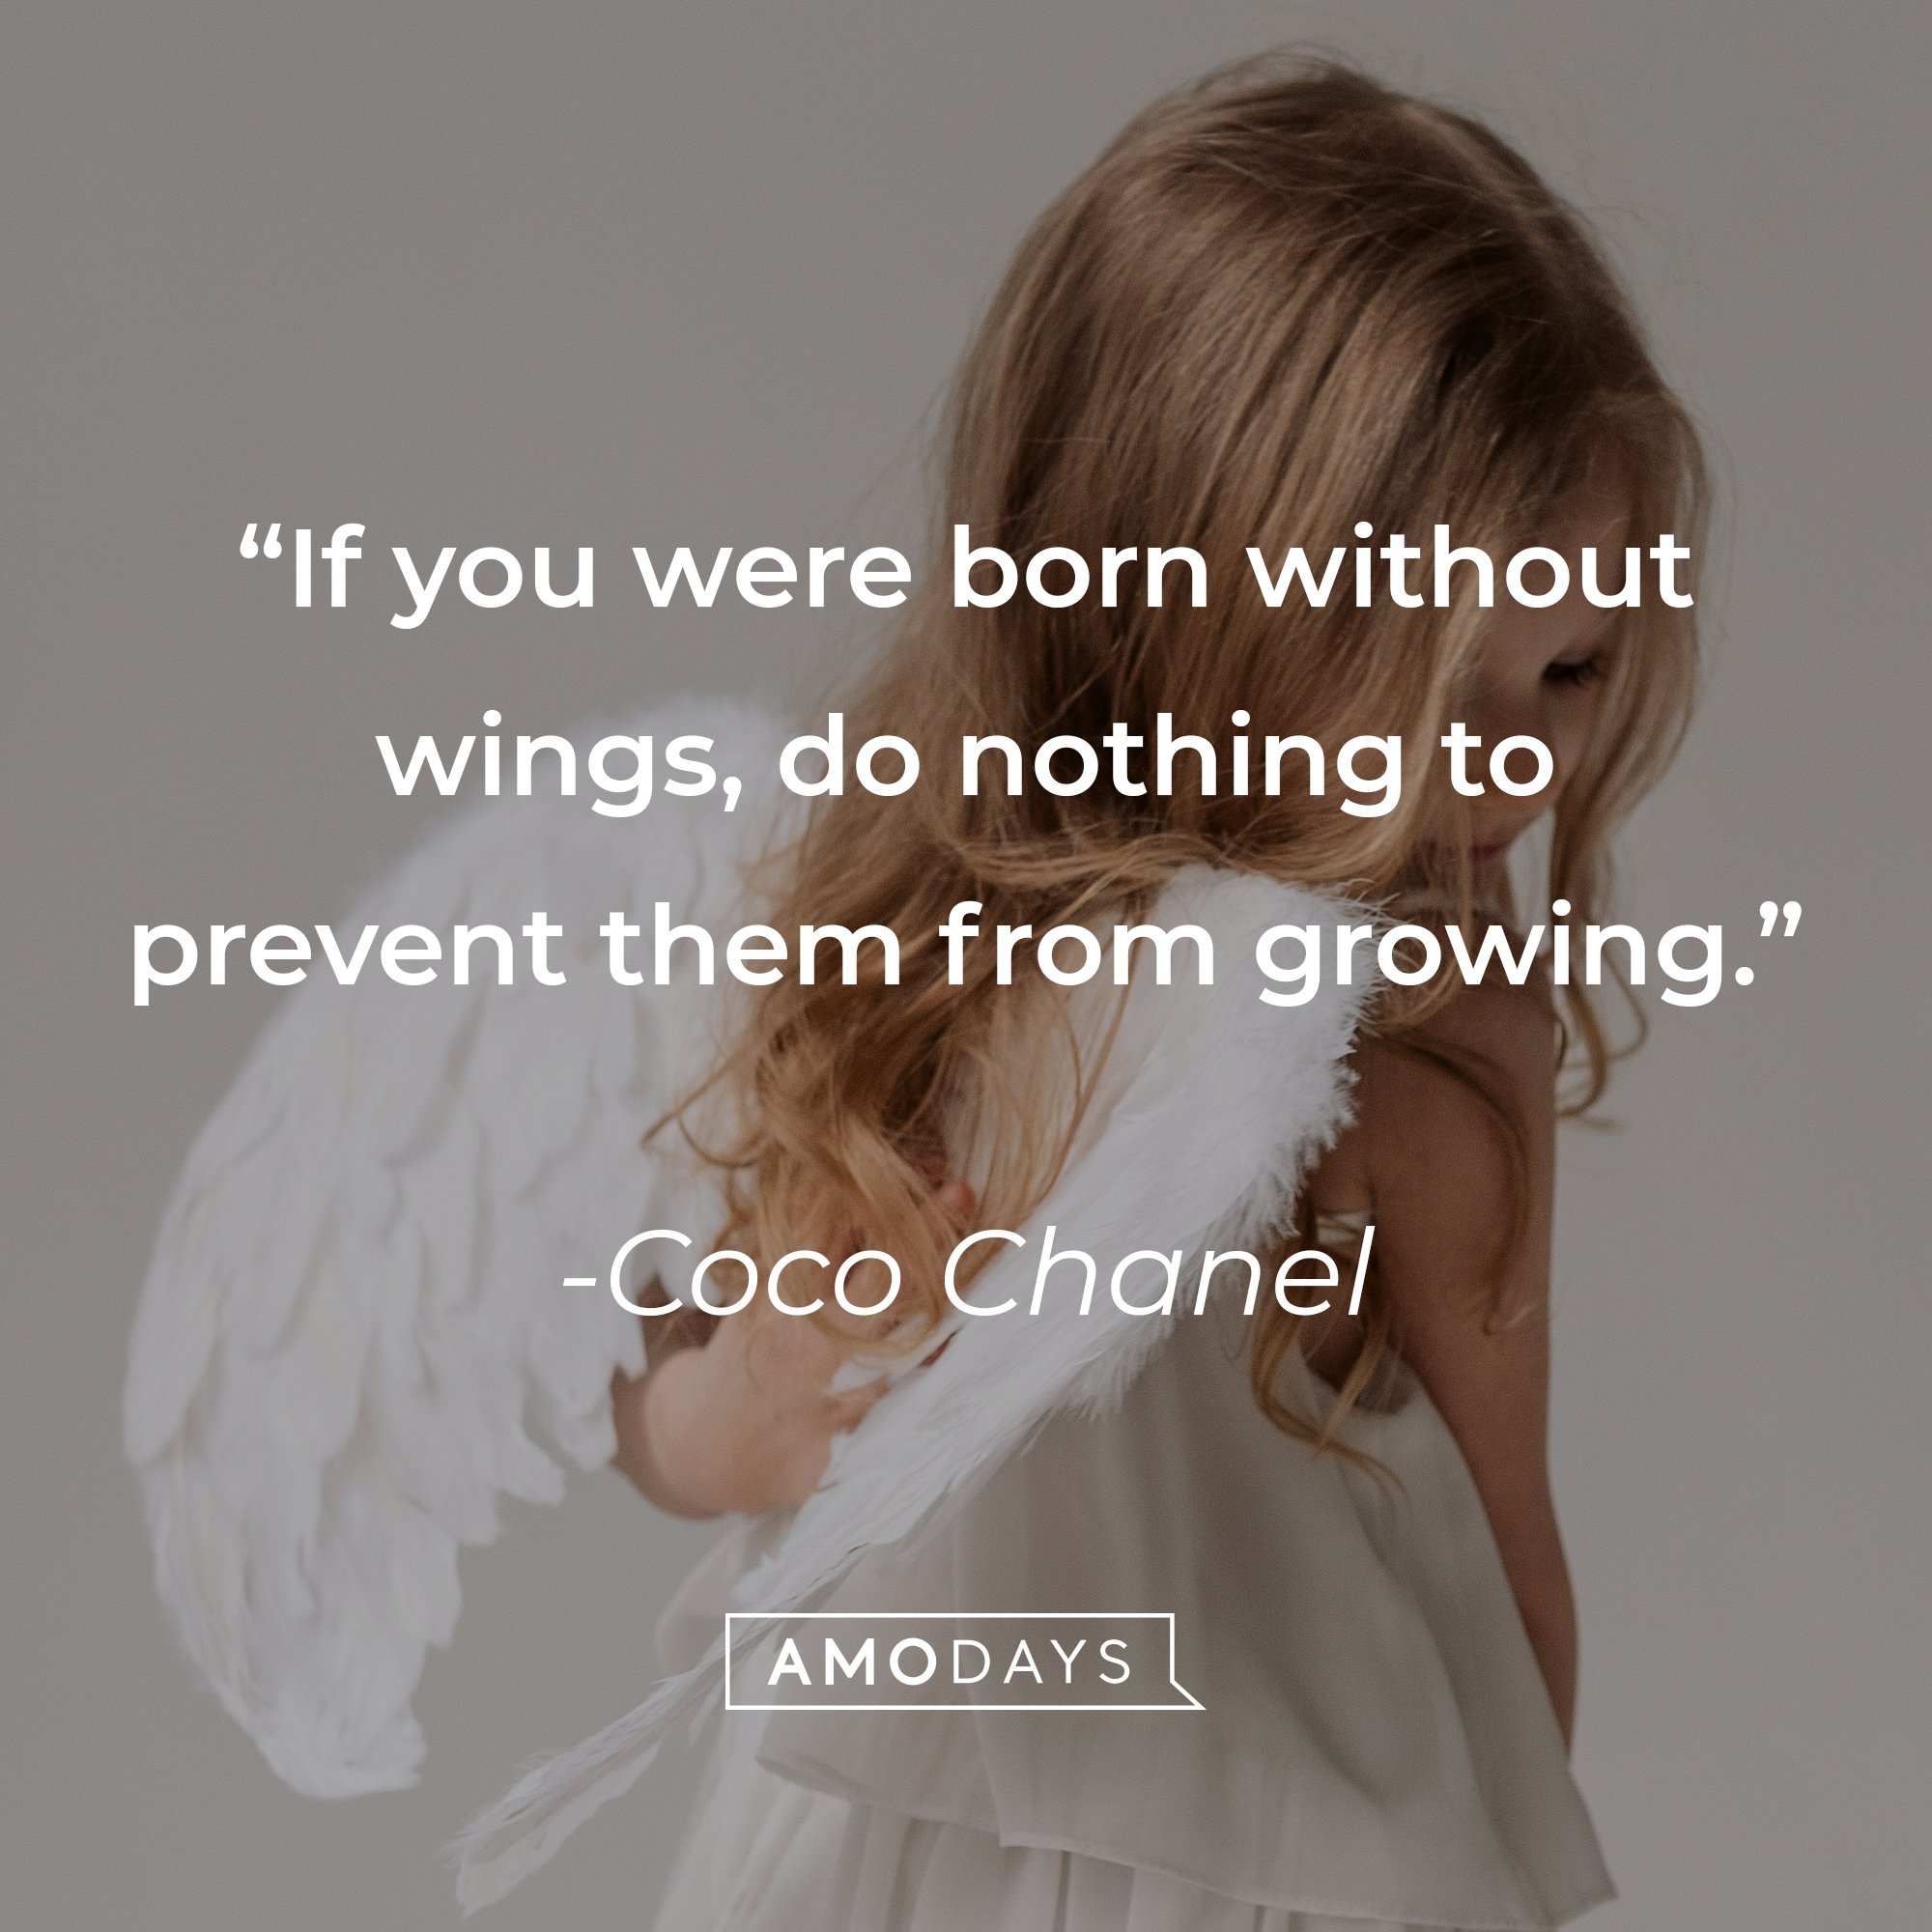 Coco Chanel's quote: "If you were born without wings, do nothing to prevent them from growing." | Image: AmoDays